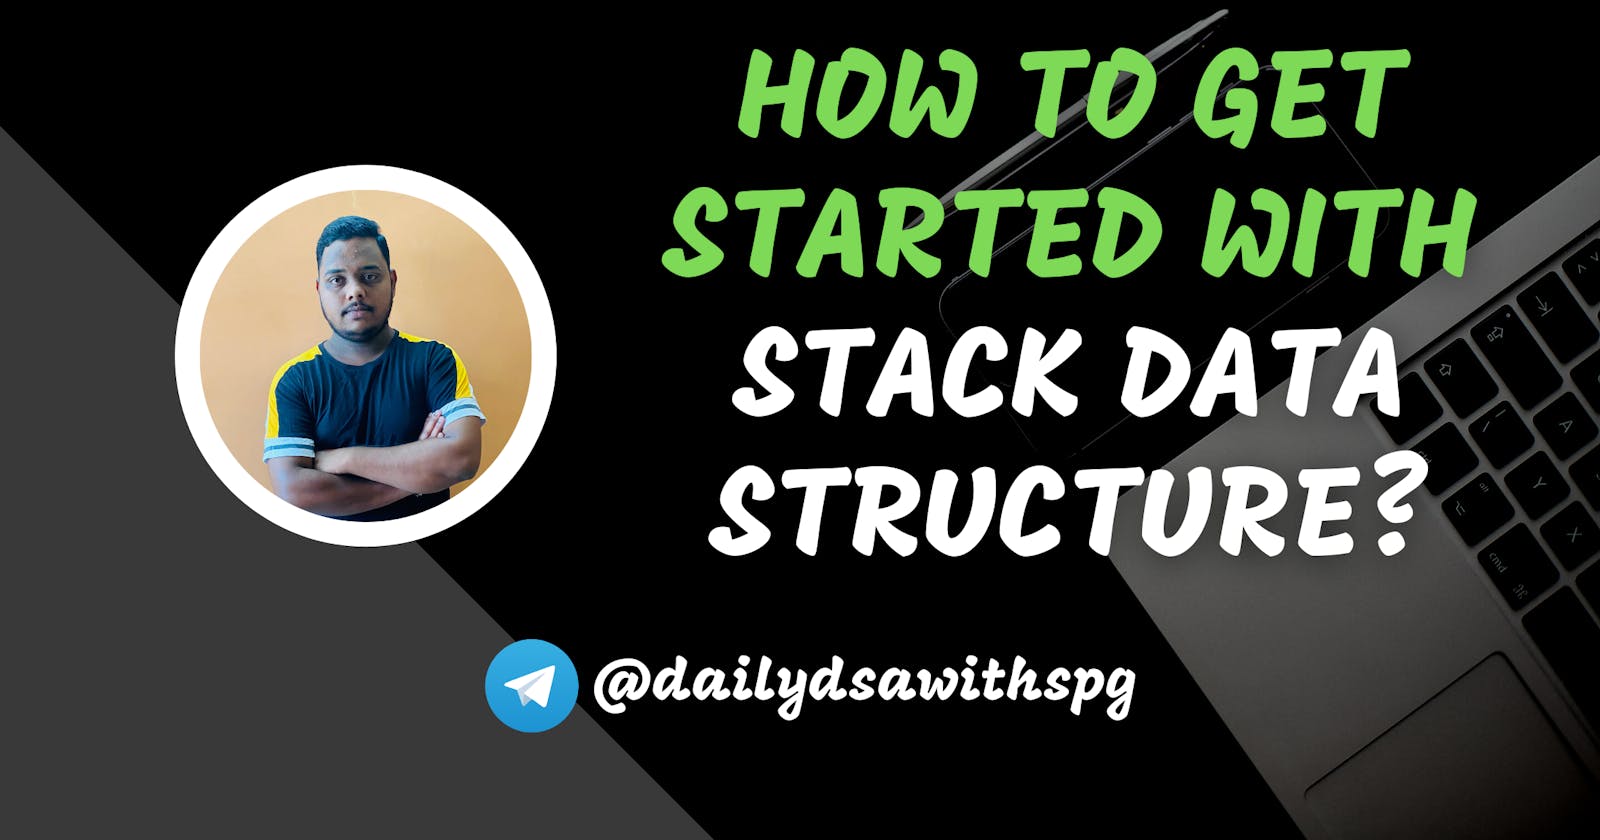 How to get started with Stack Data Structure?